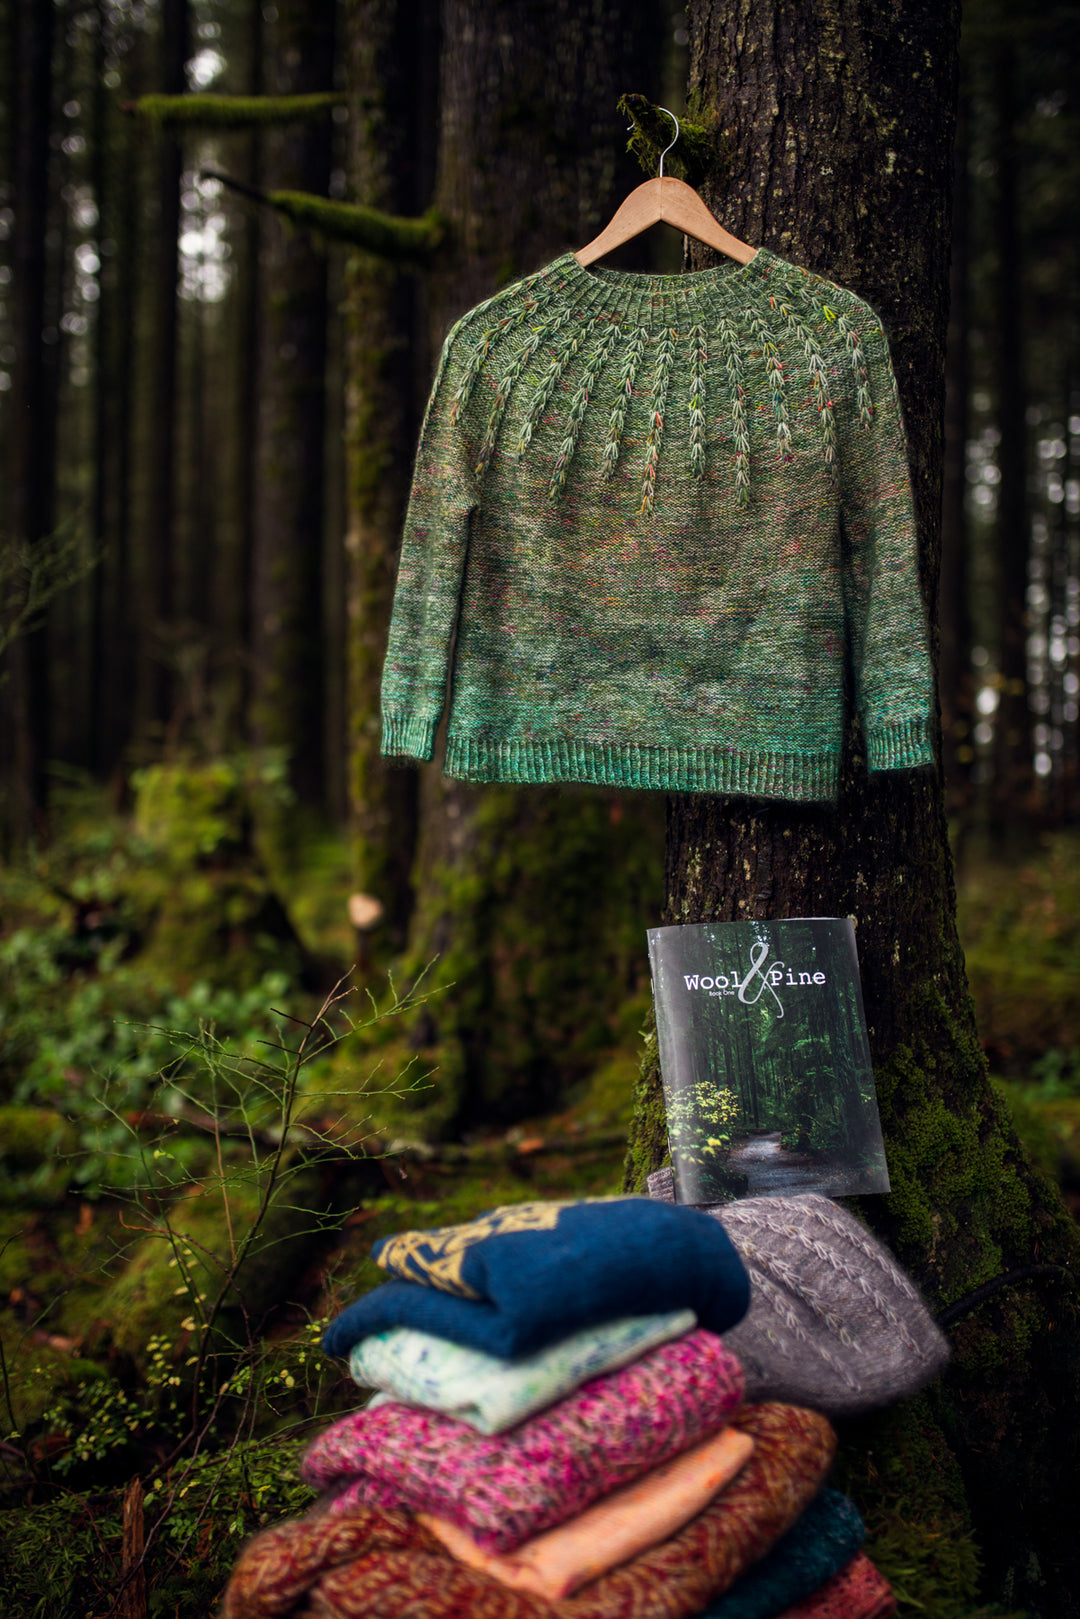 A green ombre sweater hangs from a tree branch over a pile of colorful knitwear.